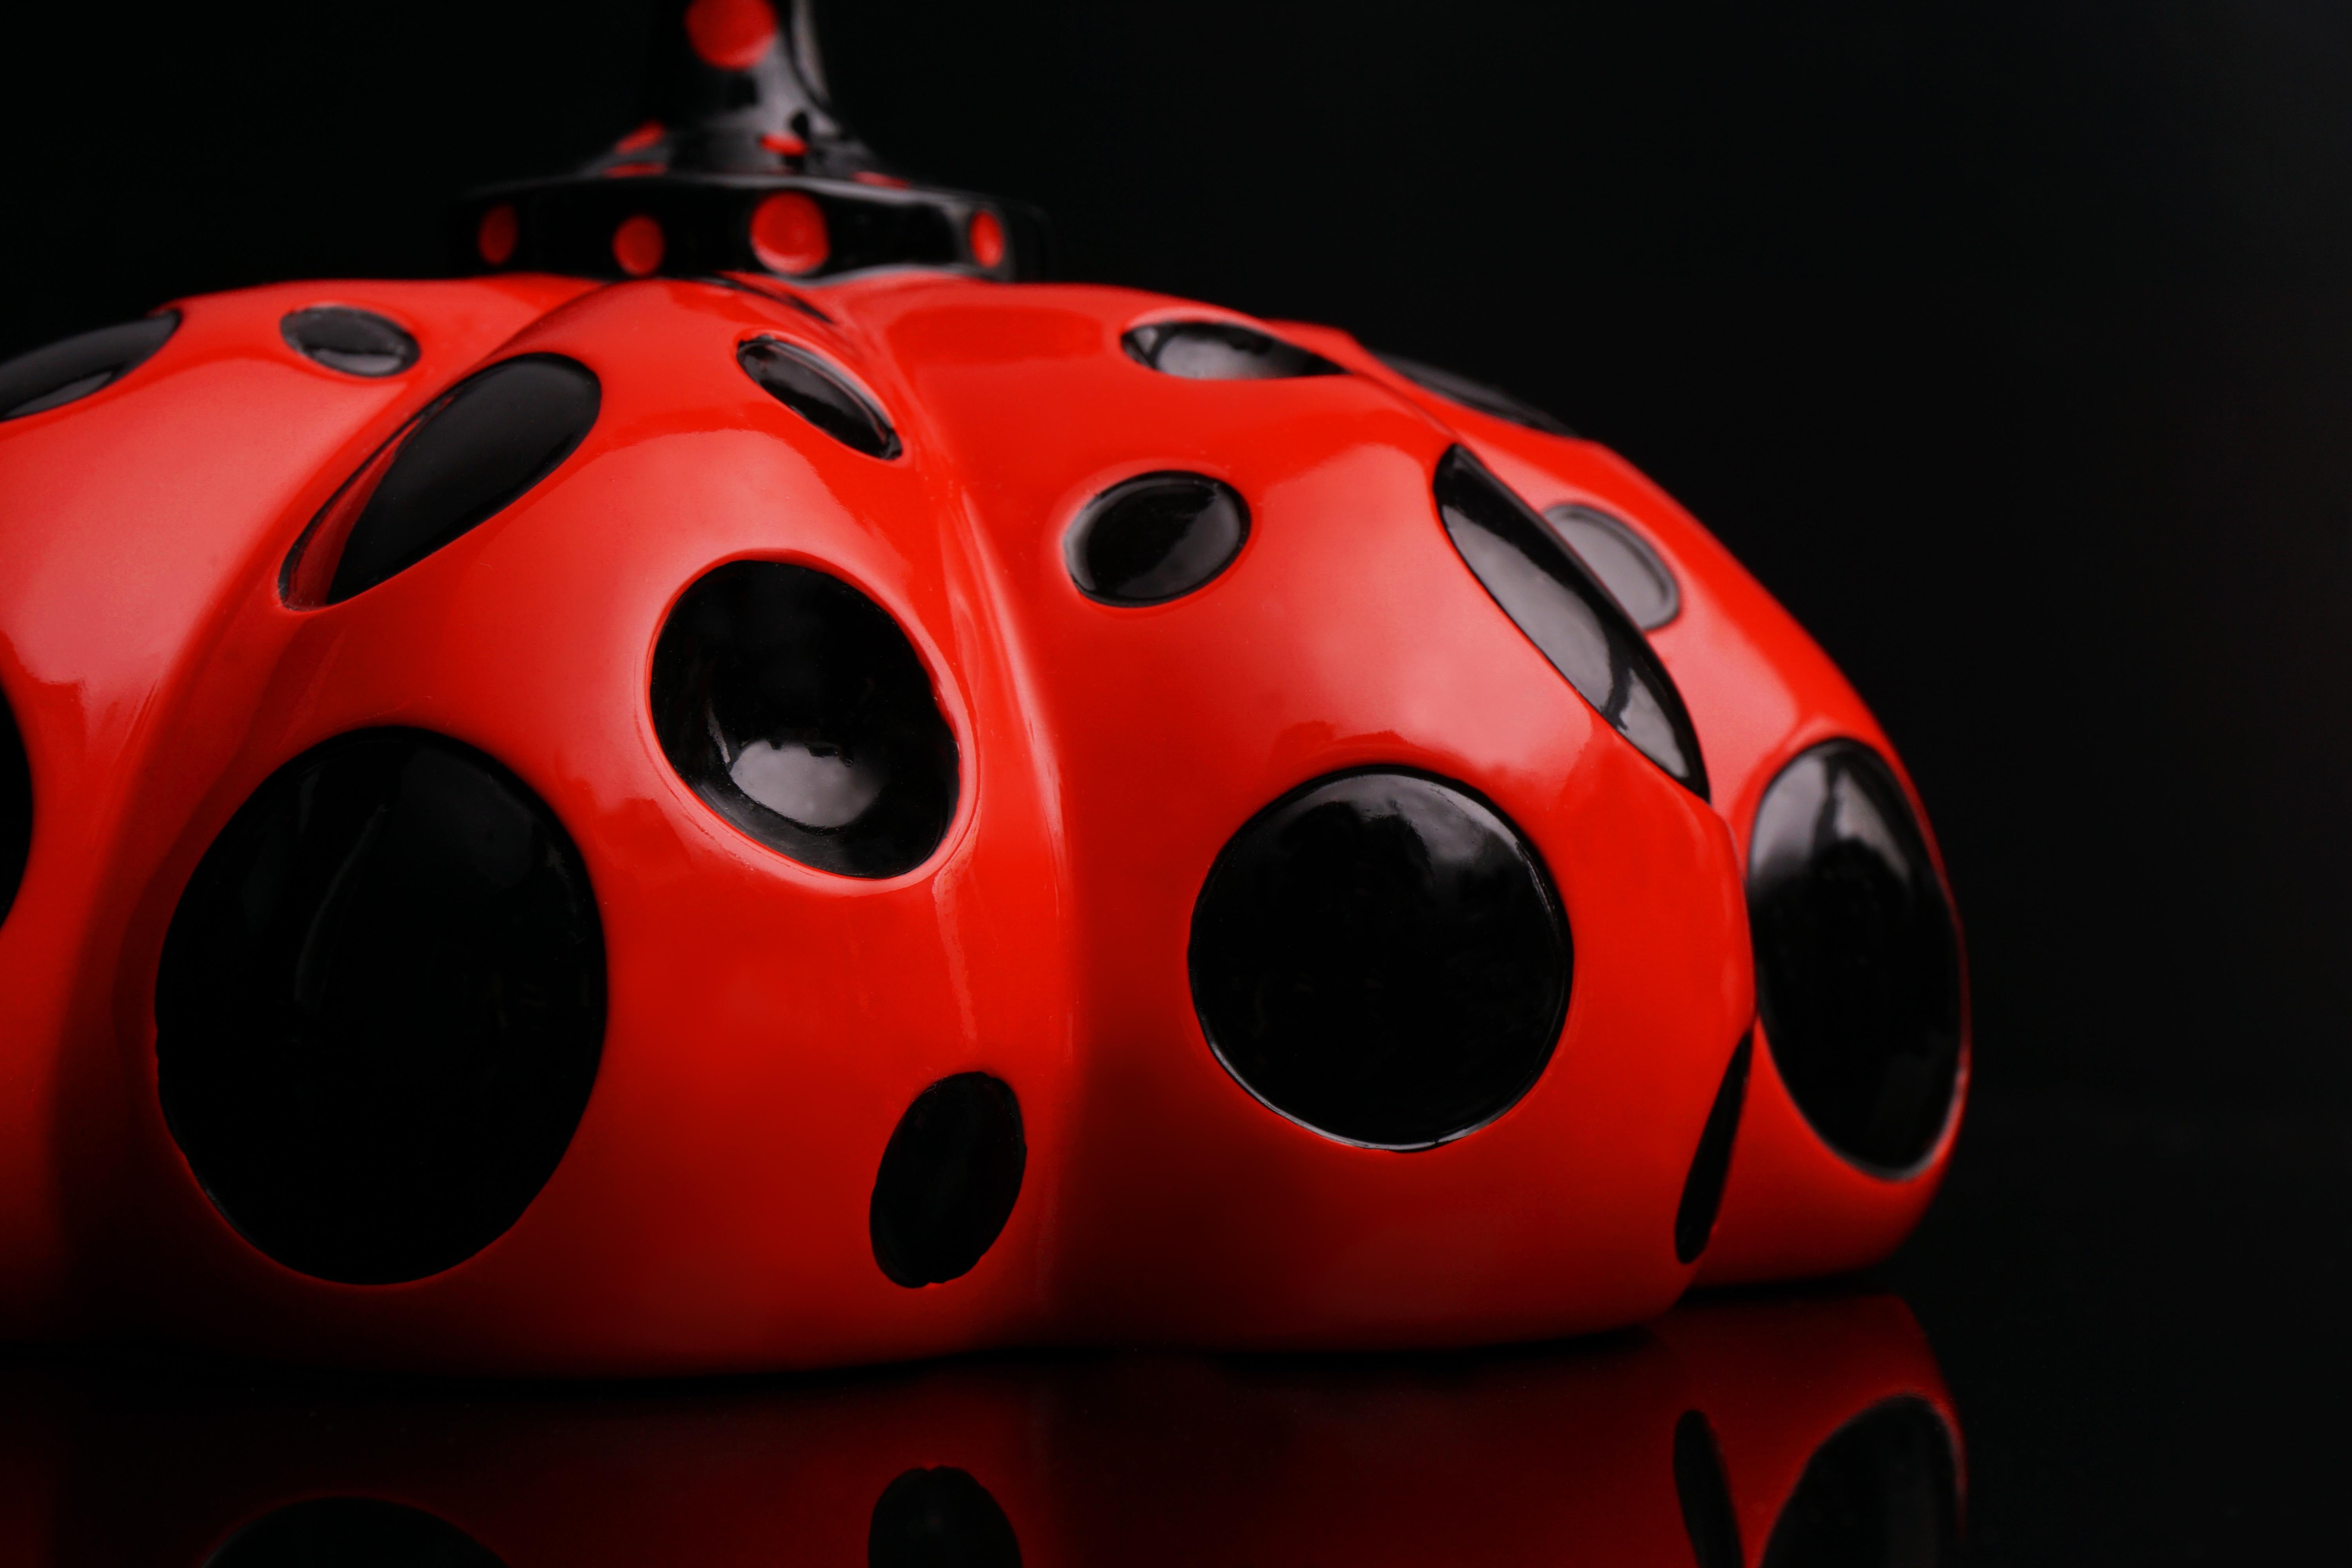 The ’Naoshima’ Red Pumpkin is a painted lacquer resin abstract sculpture and art object by legendary contemporary Artist, Yayoi Kusama. Created in 2019, the polka-dotted piece is a quintessential example of Kusama’s iconic motif, as the pumpkin